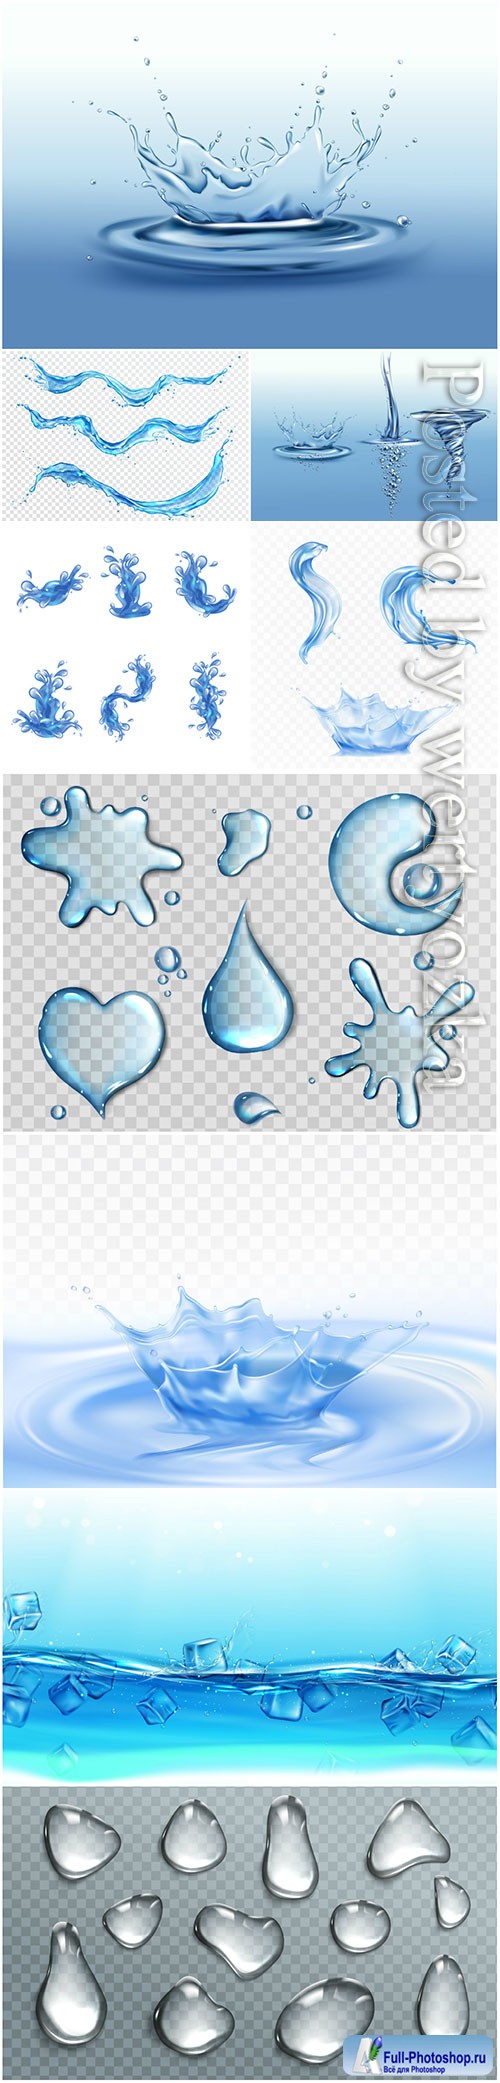 Water bottle ad banner, flask with drink, splashing water drops in vector # 4